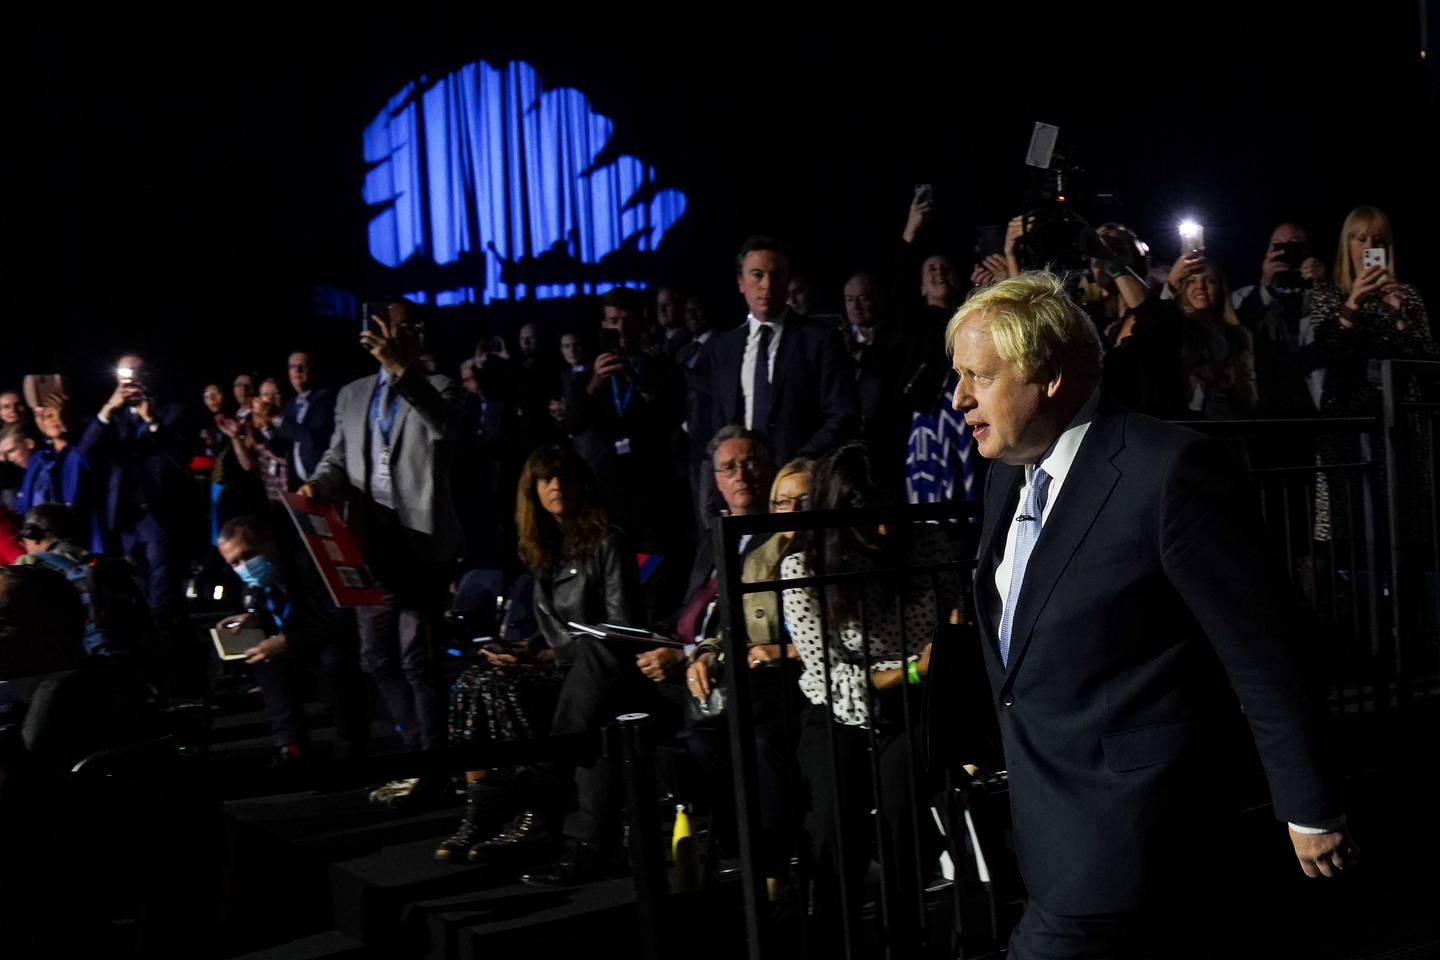 Prime Minister Boris Johnson arrives to deliver his keynote speech at the Conservative Party Conference in Manchester. PA